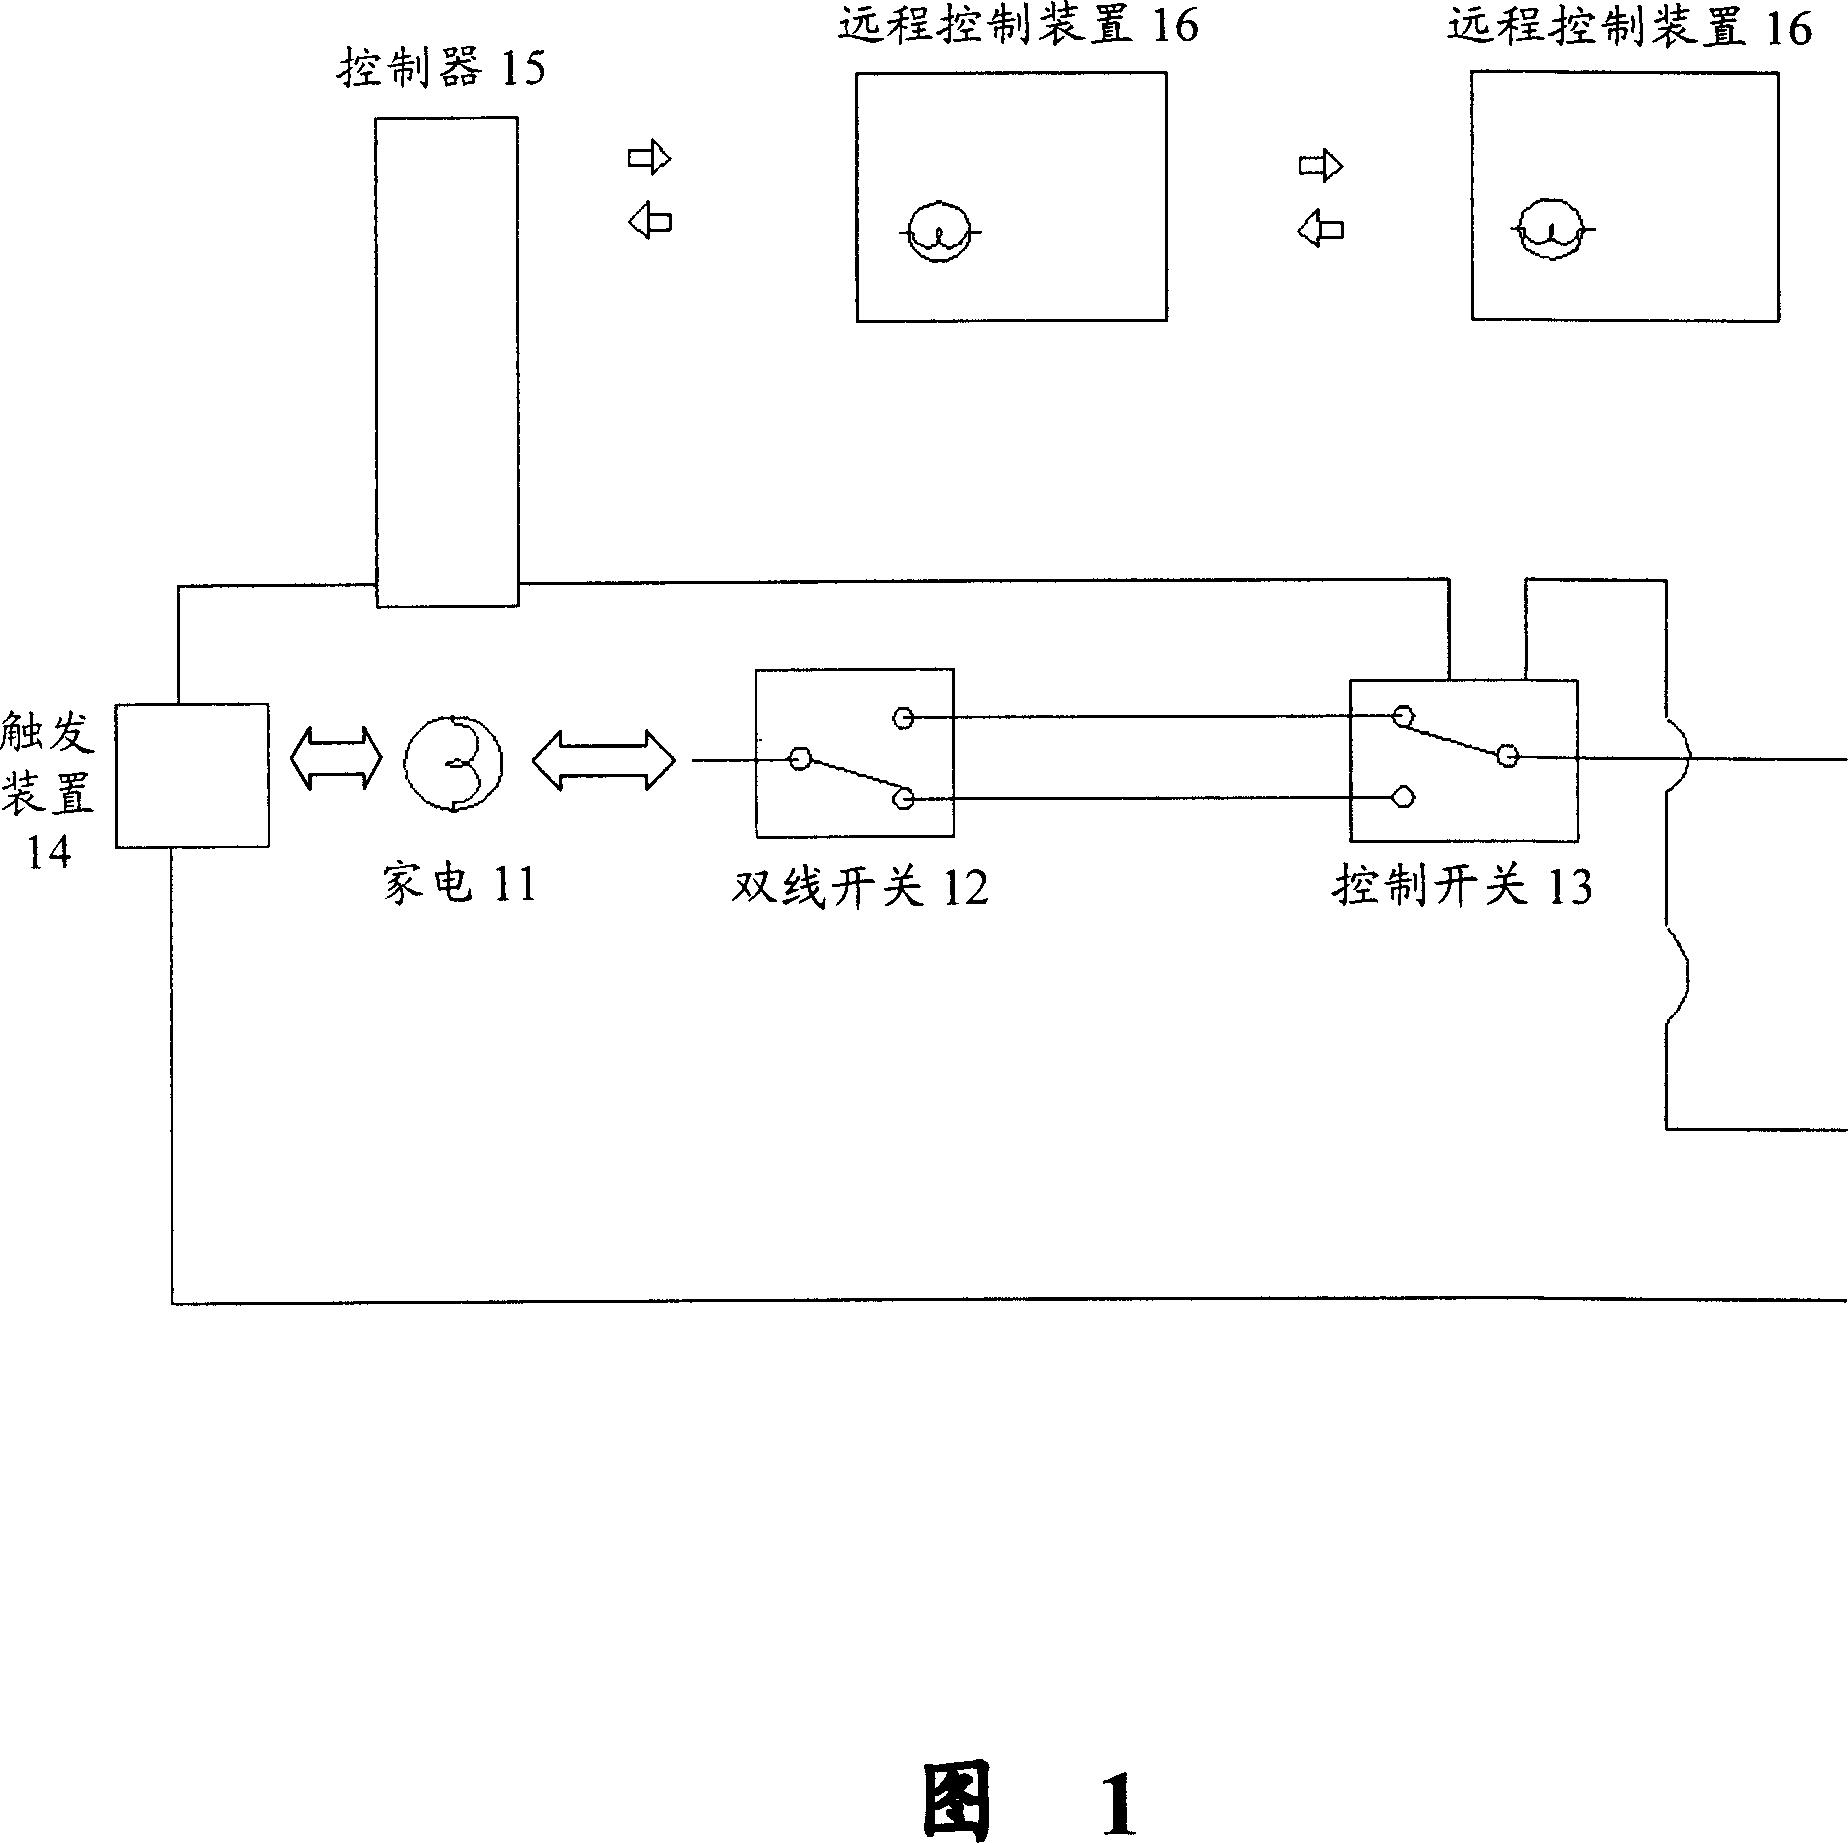 Household appliance controlling system